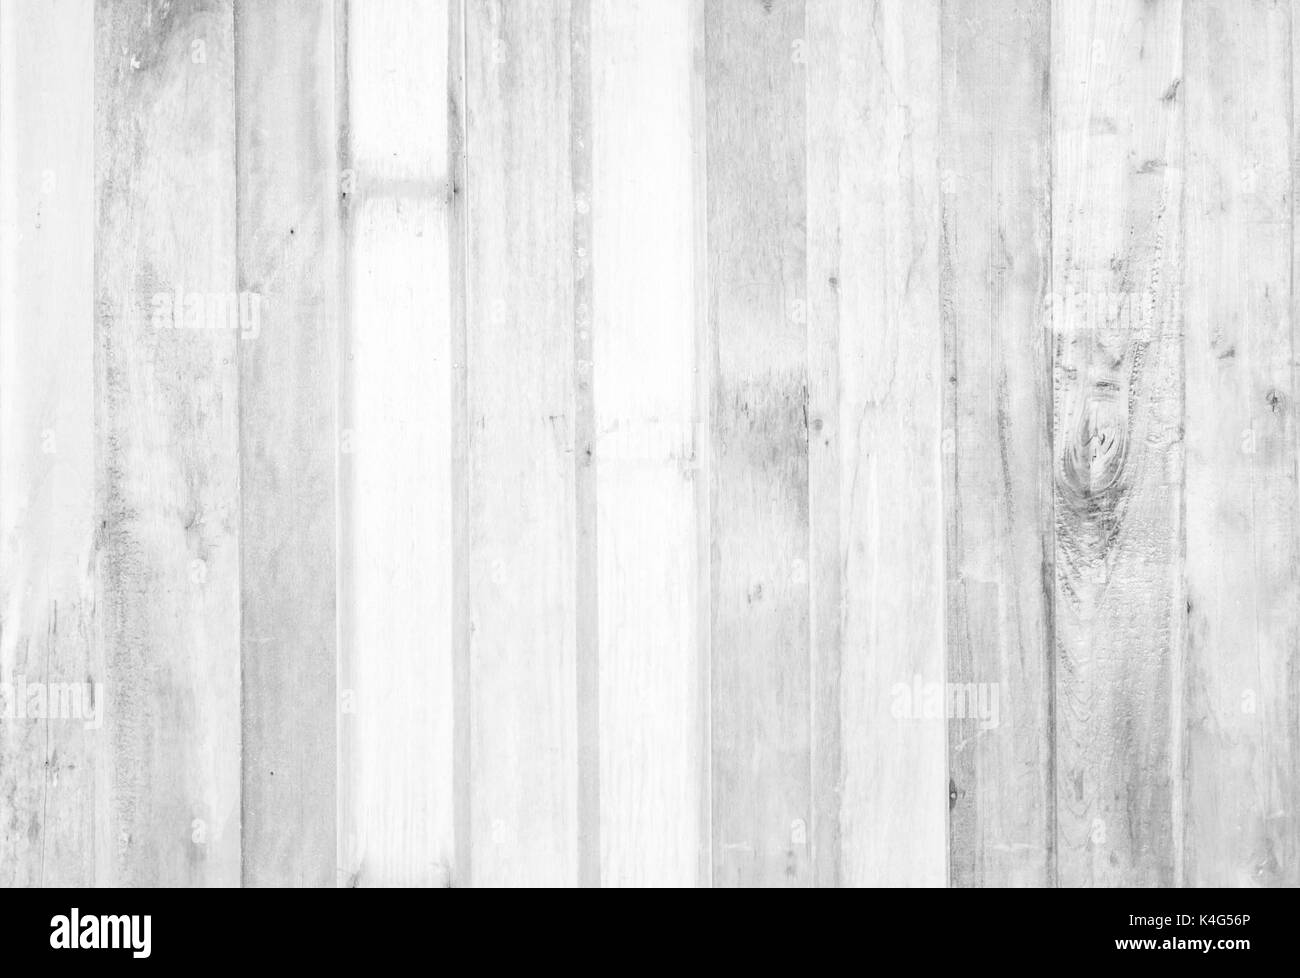 Vintage surface white wood table and rustic grain texture background. Close up of dark rustic wall made of old wood table planks texture. Rustic wood  Stock Photo